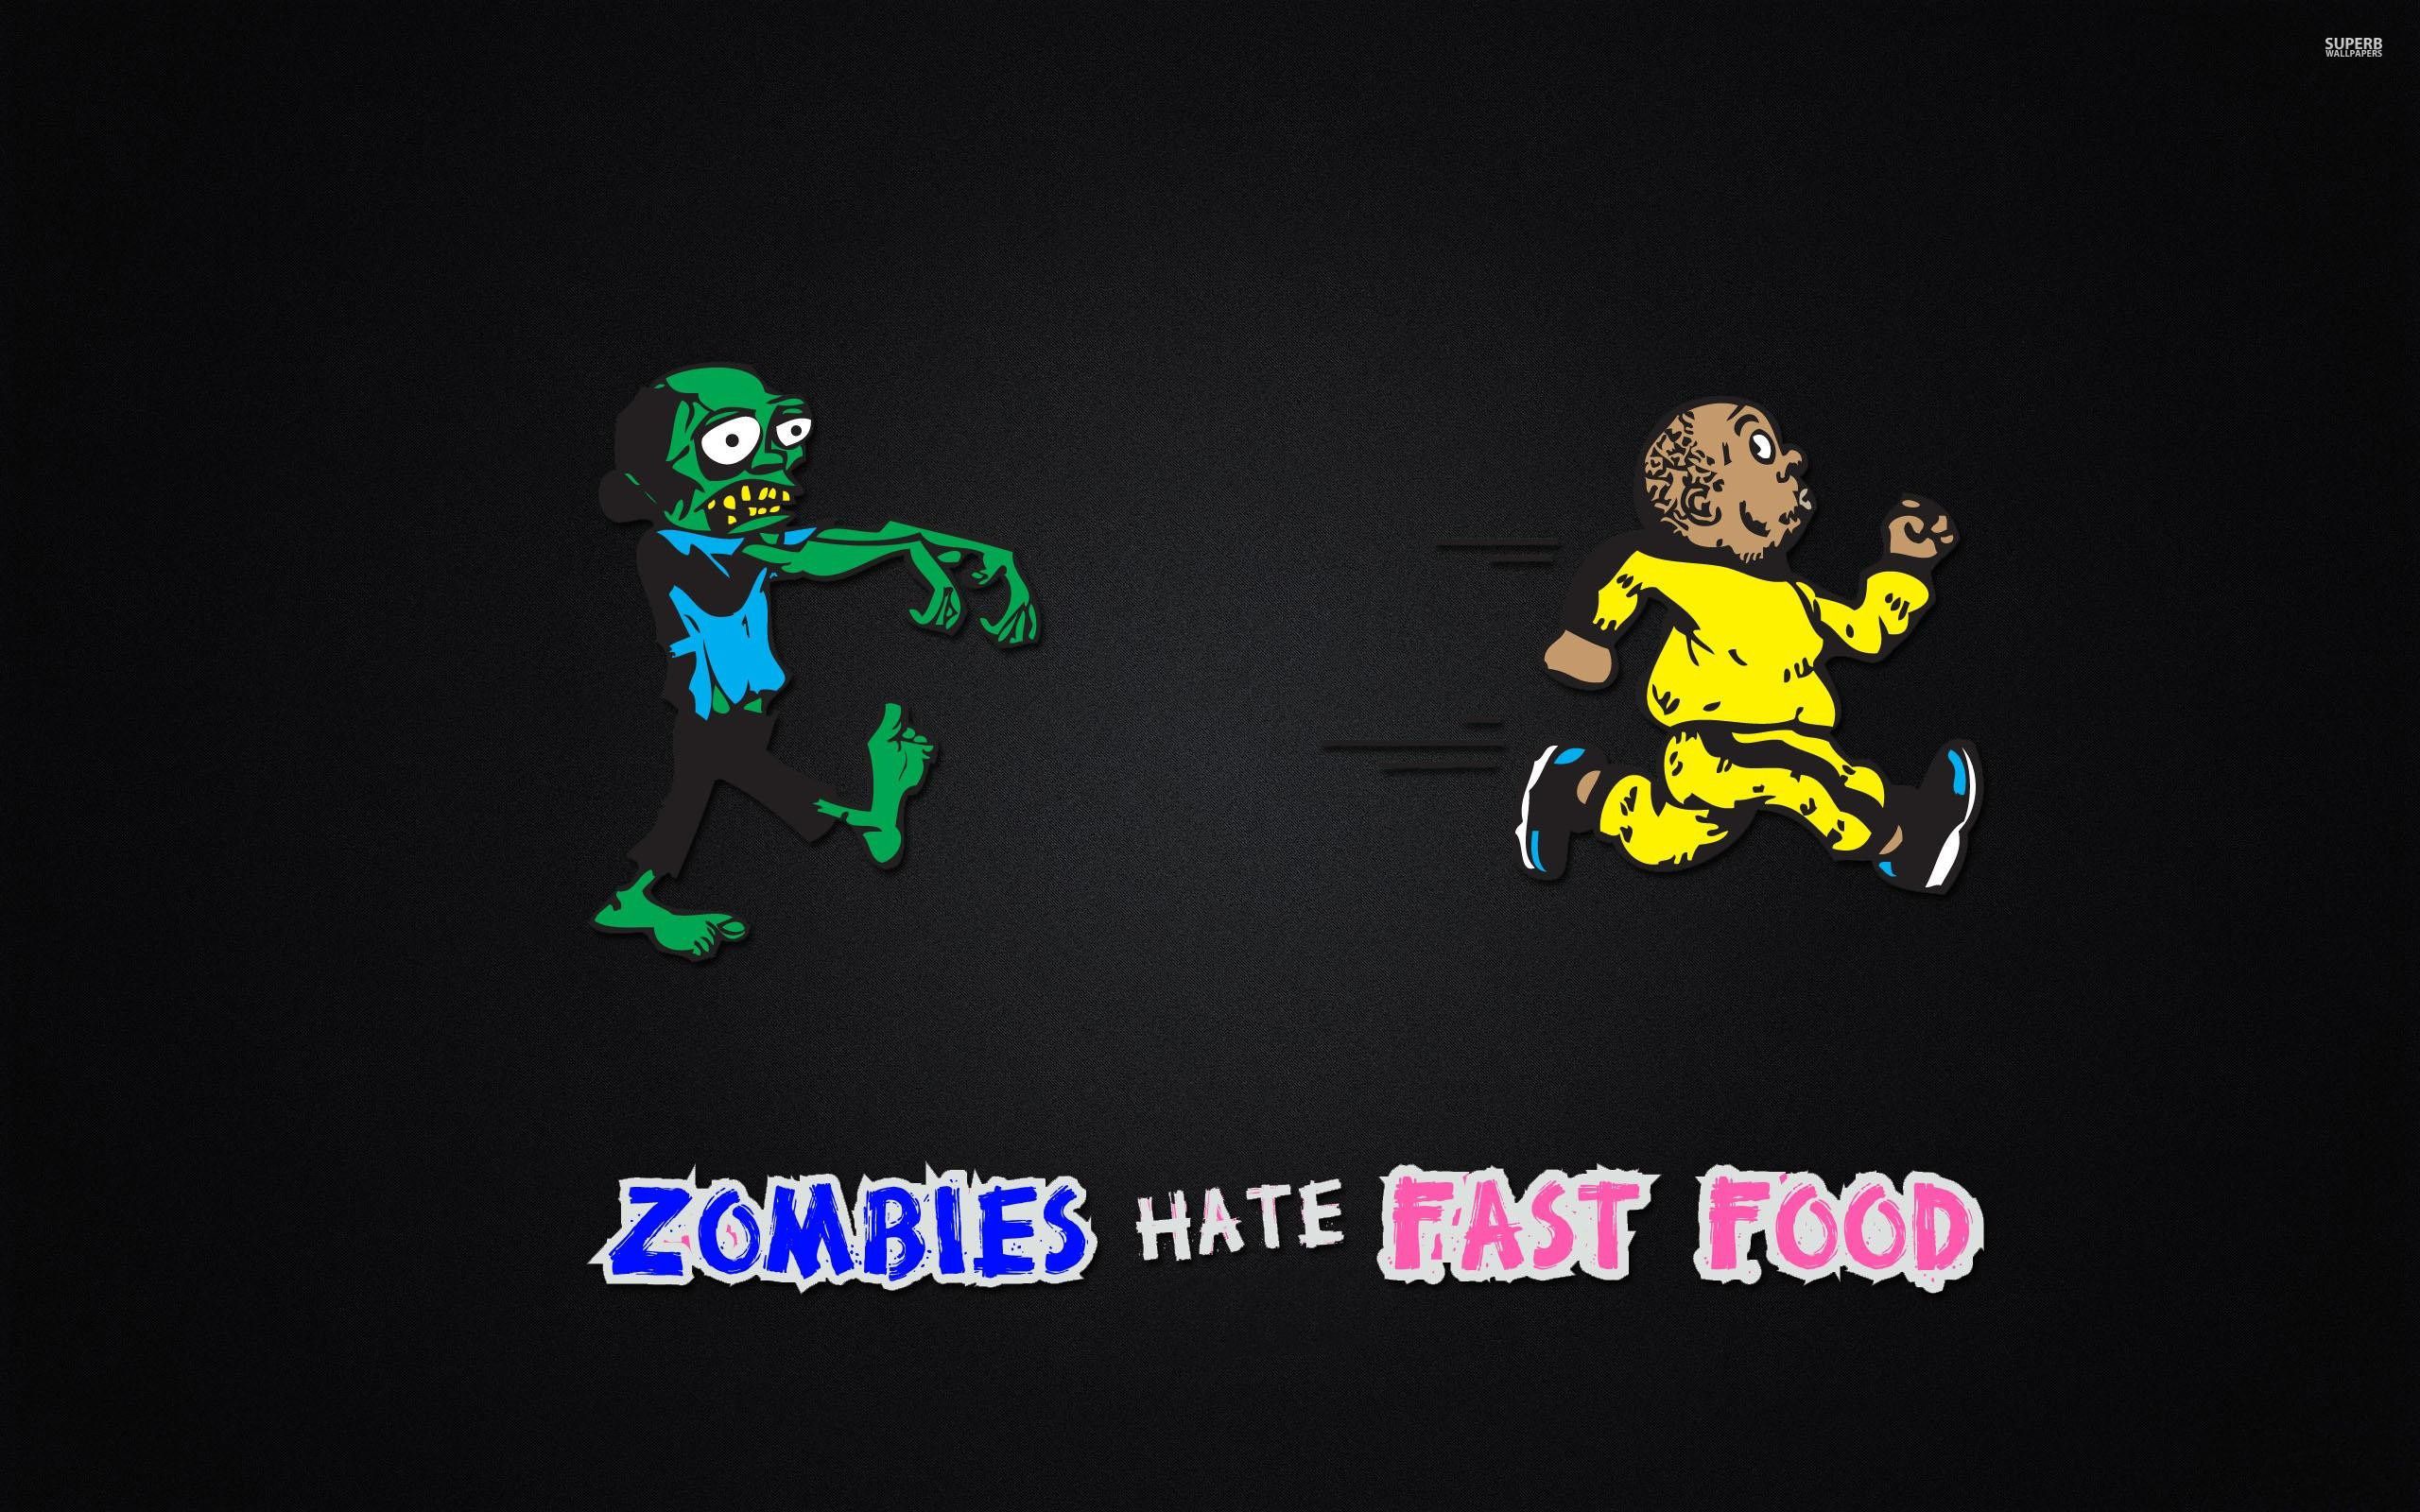 Zombies hate Fast Food wallpaper - Funny wallpapers - #43134